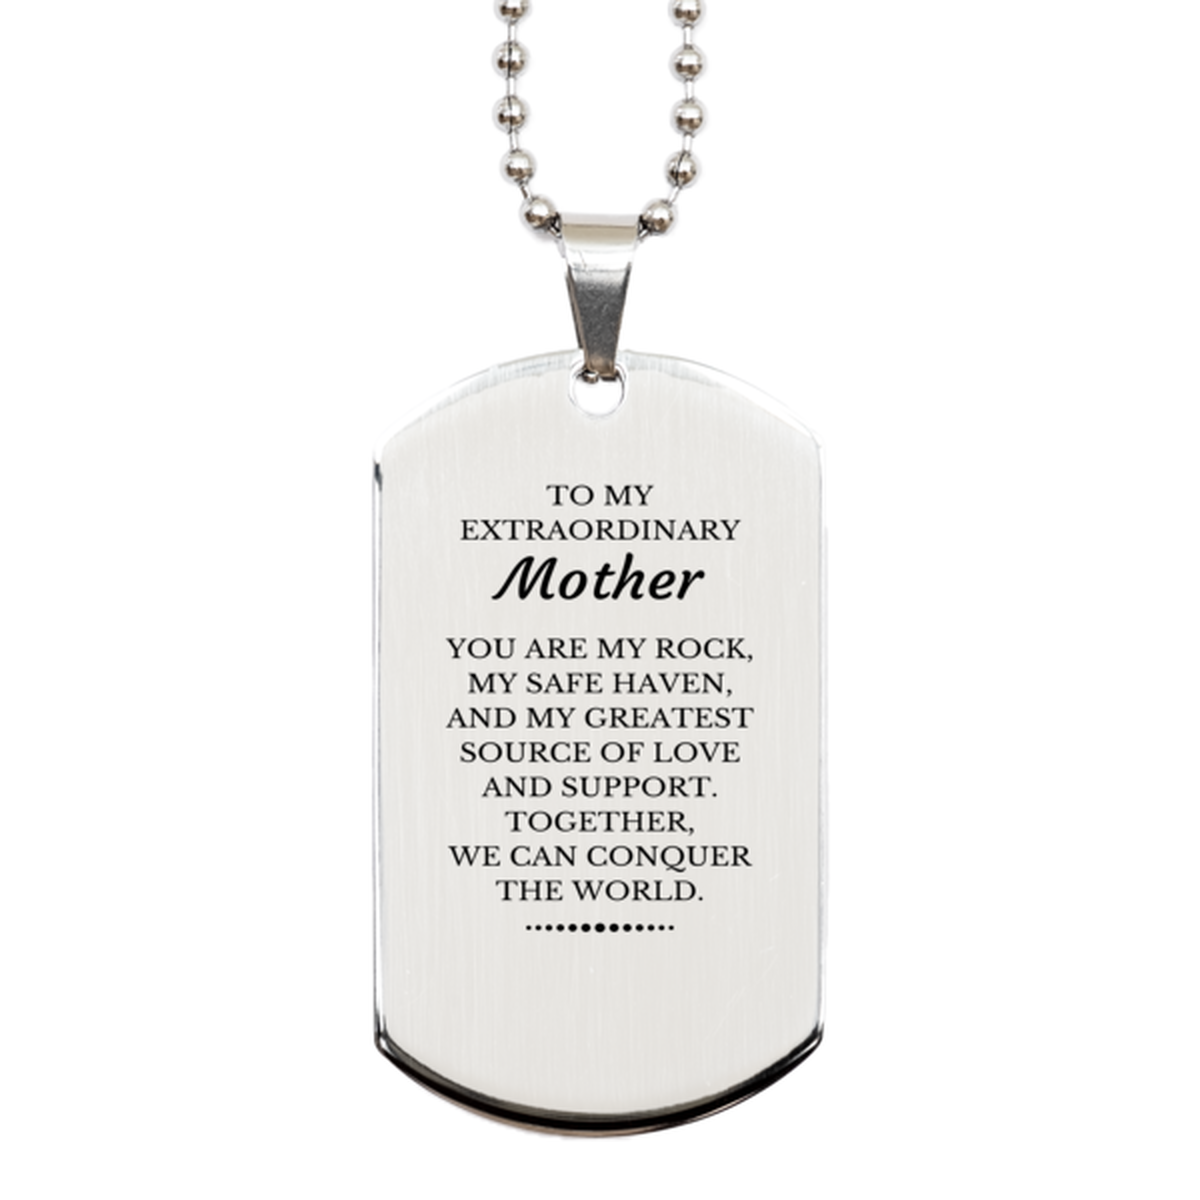 To My Extraordinary Mother Gifts, Together, we can conquer the world, Birthday Silver Dog Tag For Mother, Christmas Gifts For Mother